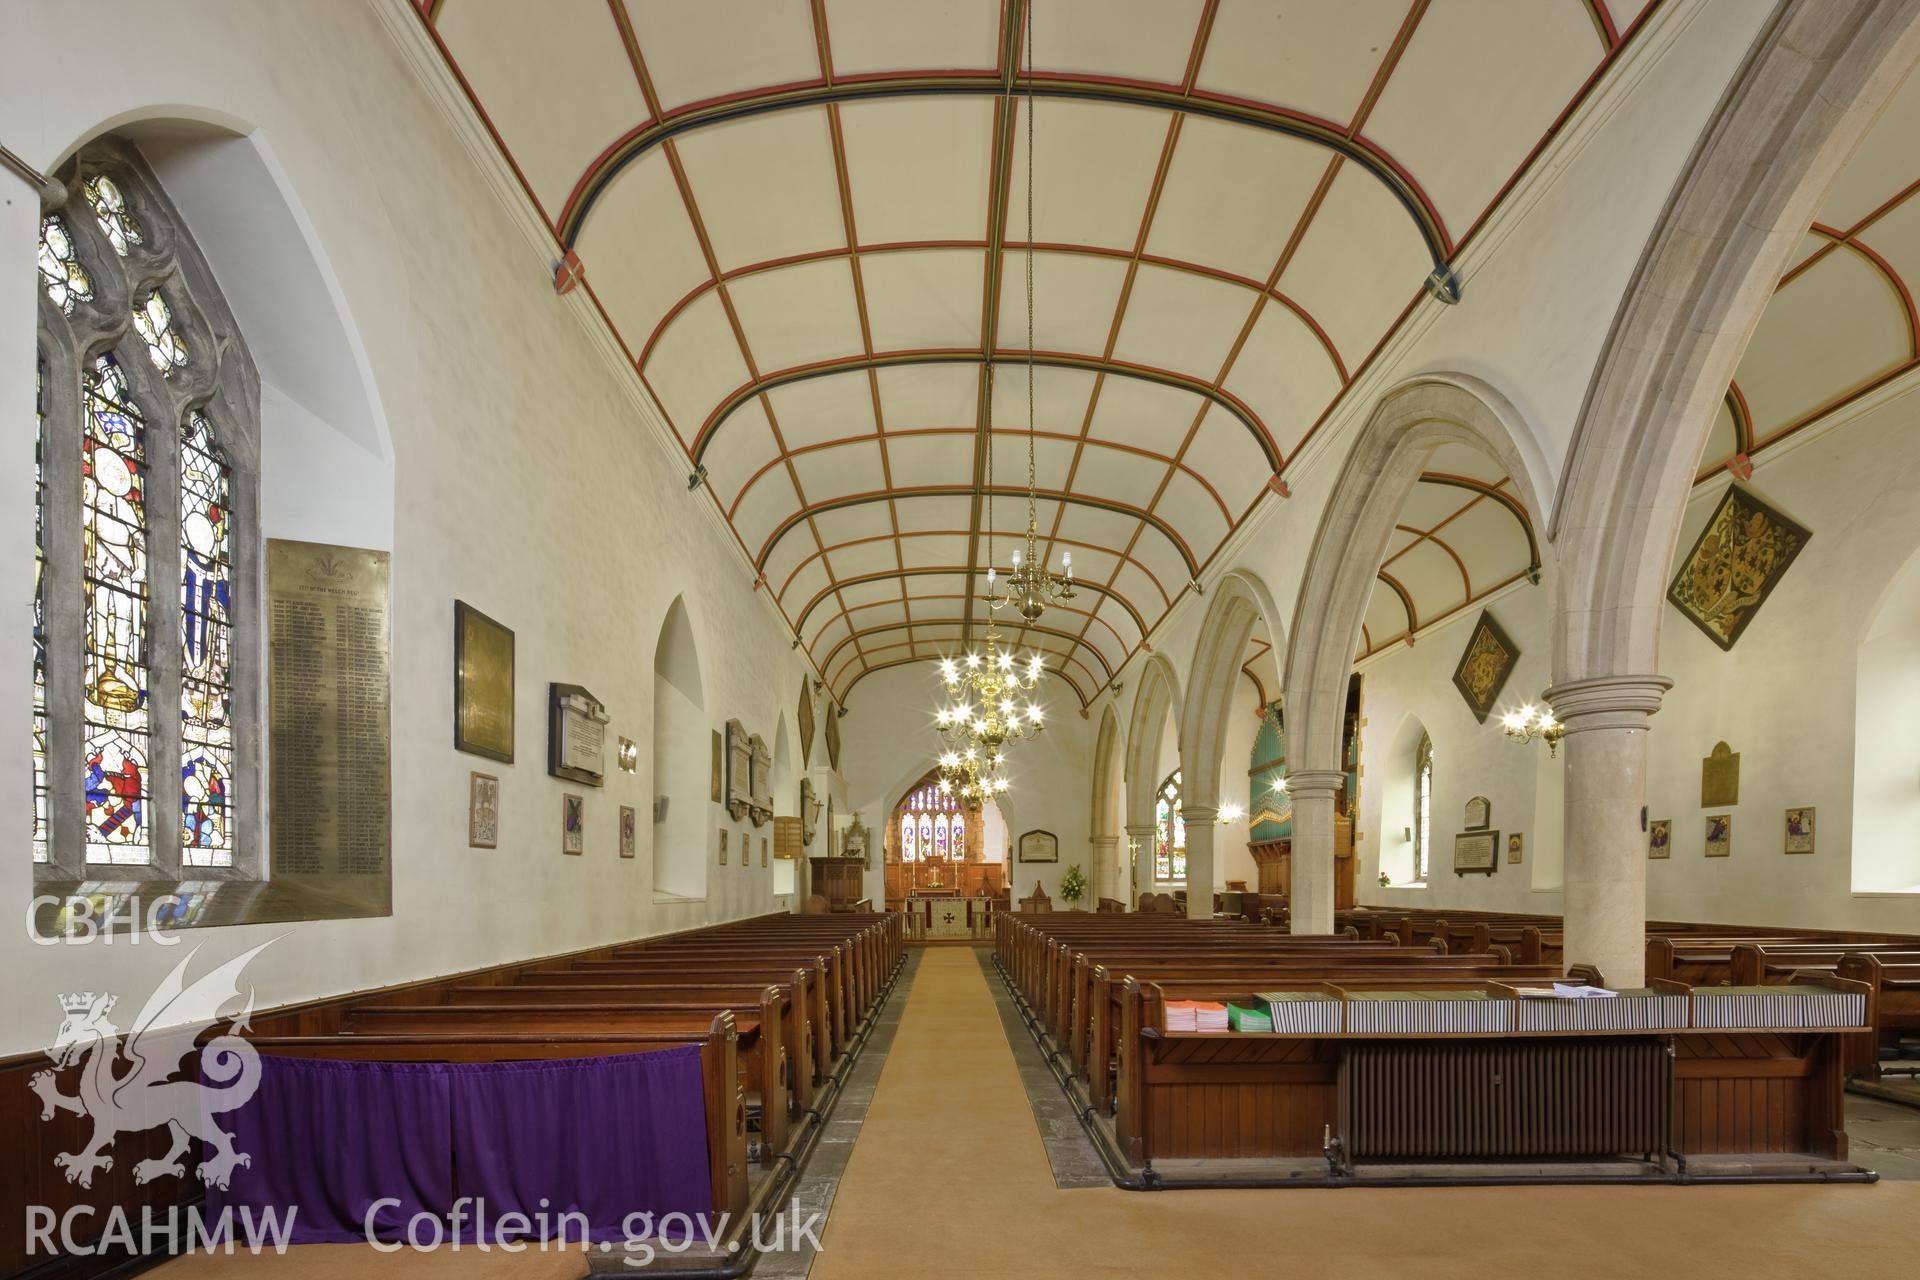 Interior, north aisle from the west.